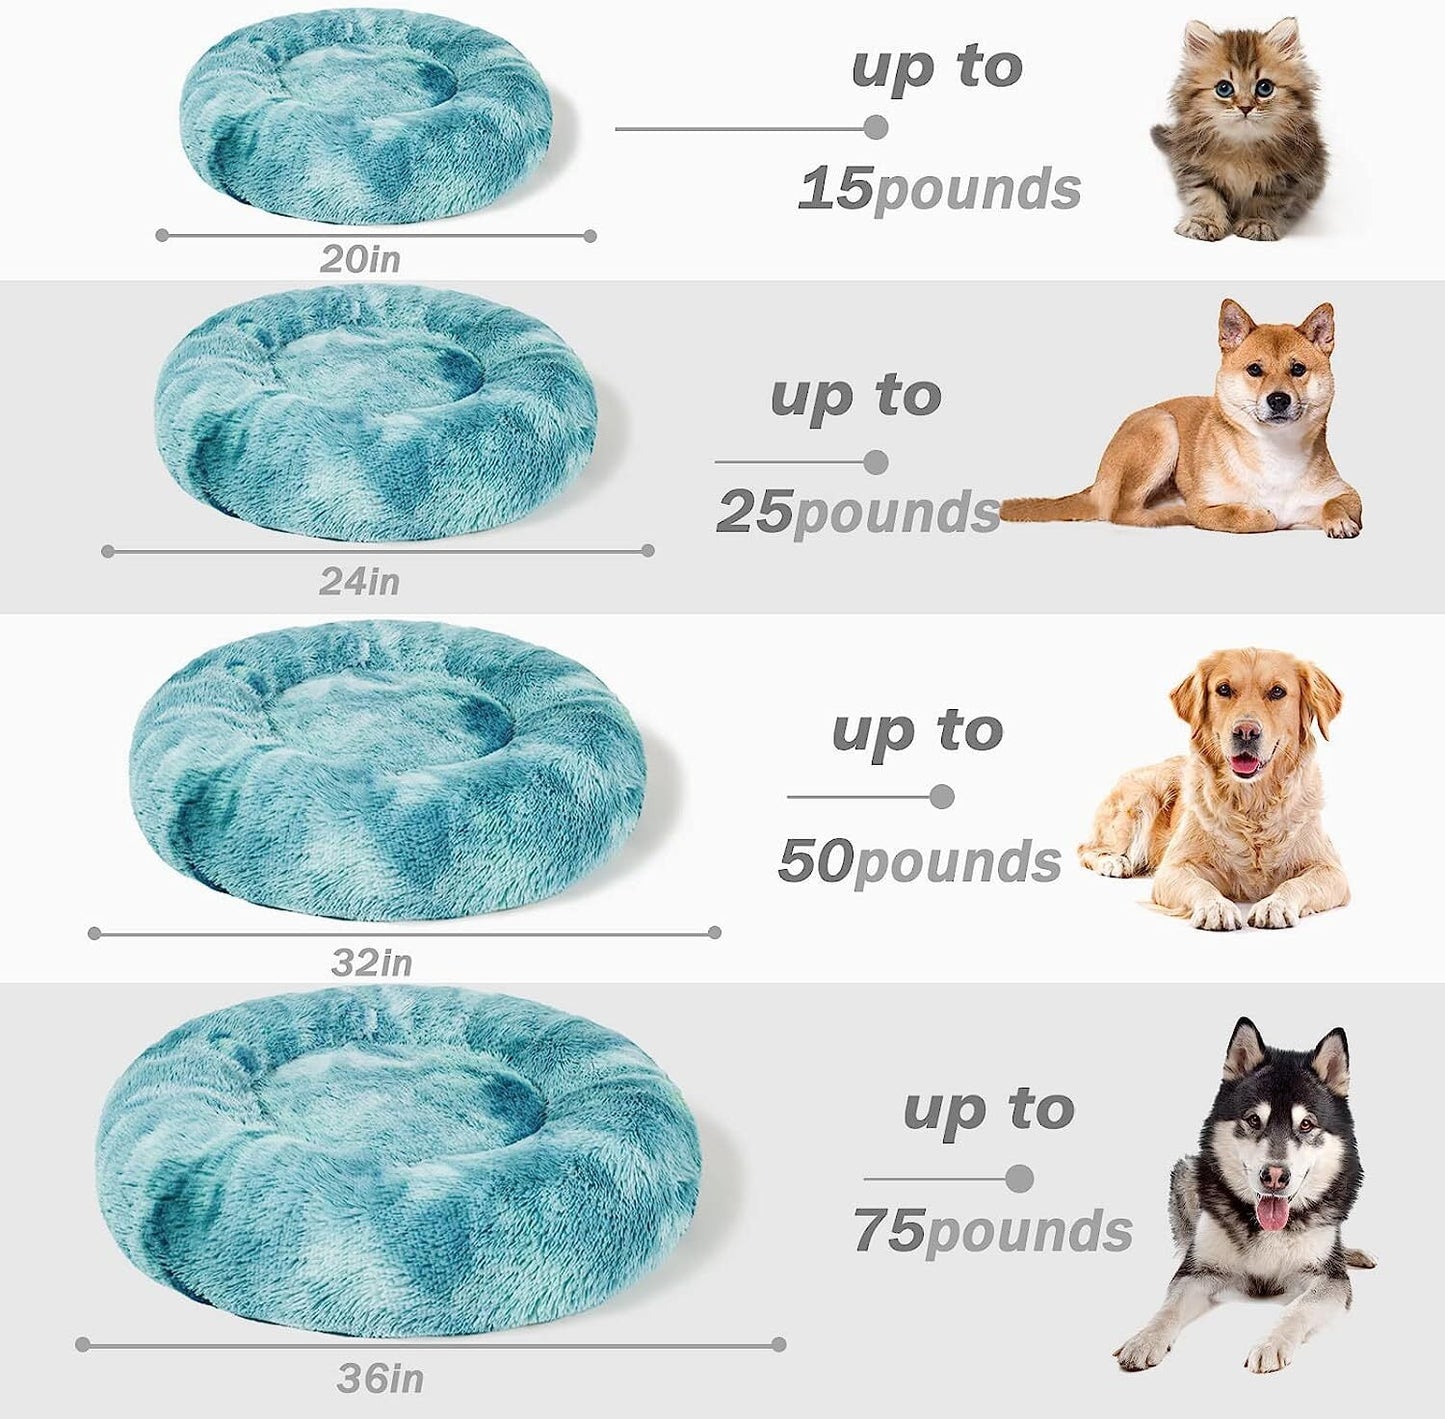 Exclusivo Mezcla Calming Donut Dog Bed Cat Bed for Small Medium Large Dogs and Cats Anti-Anxiety Plush Soft and Cozy Cat Bed Warming Pet Bed for Winter and Fall (20IN, Gradient Aqua)